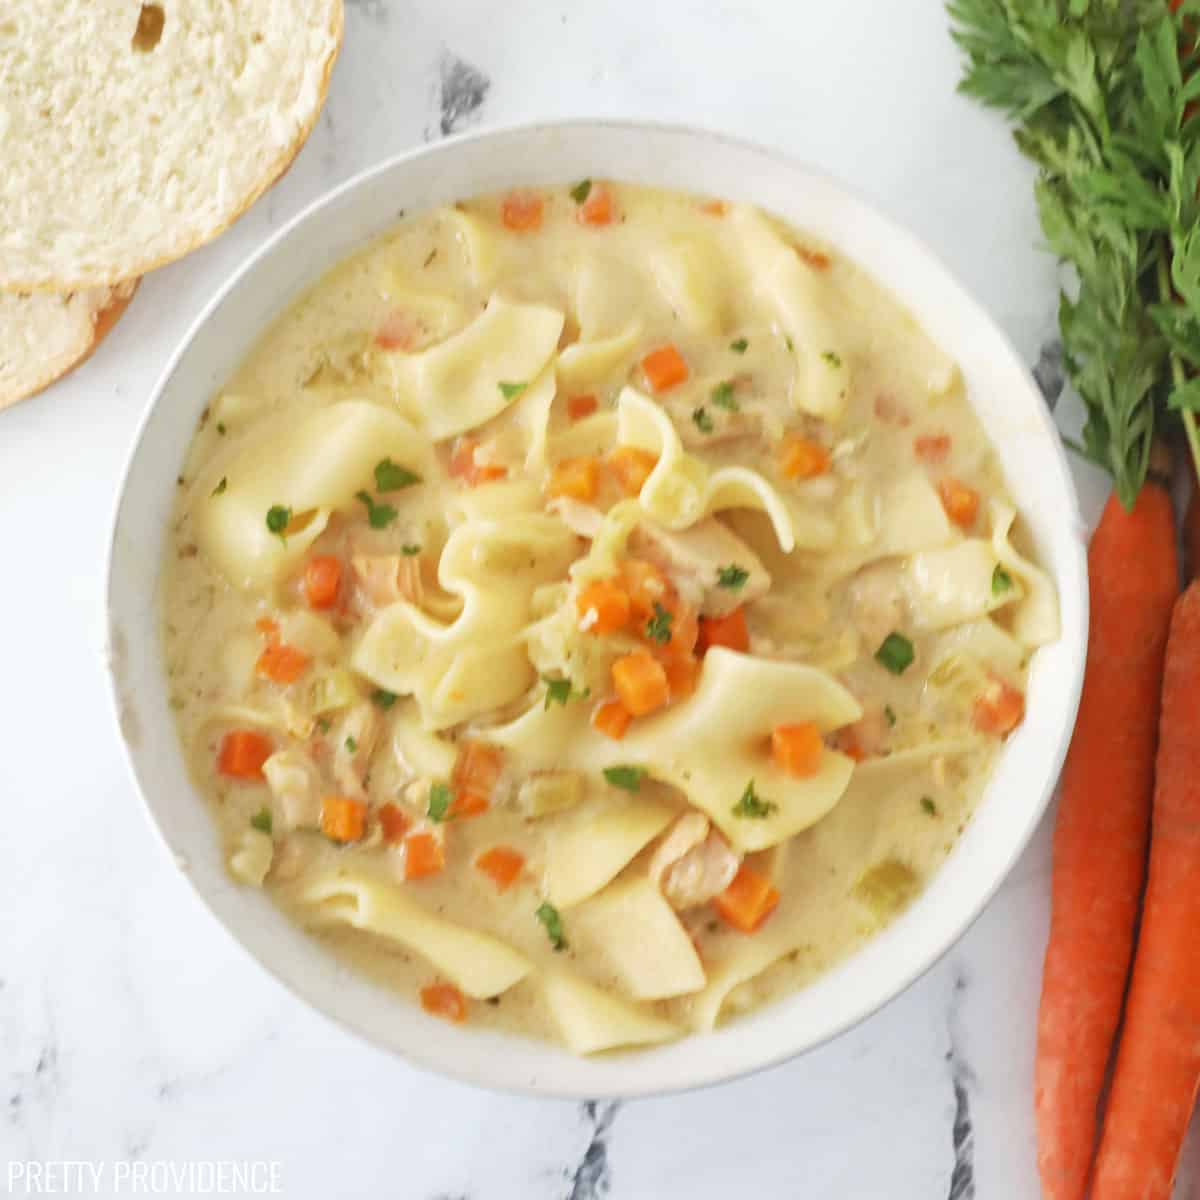 Literally the BEST Chicken Noodle Soup Recipe